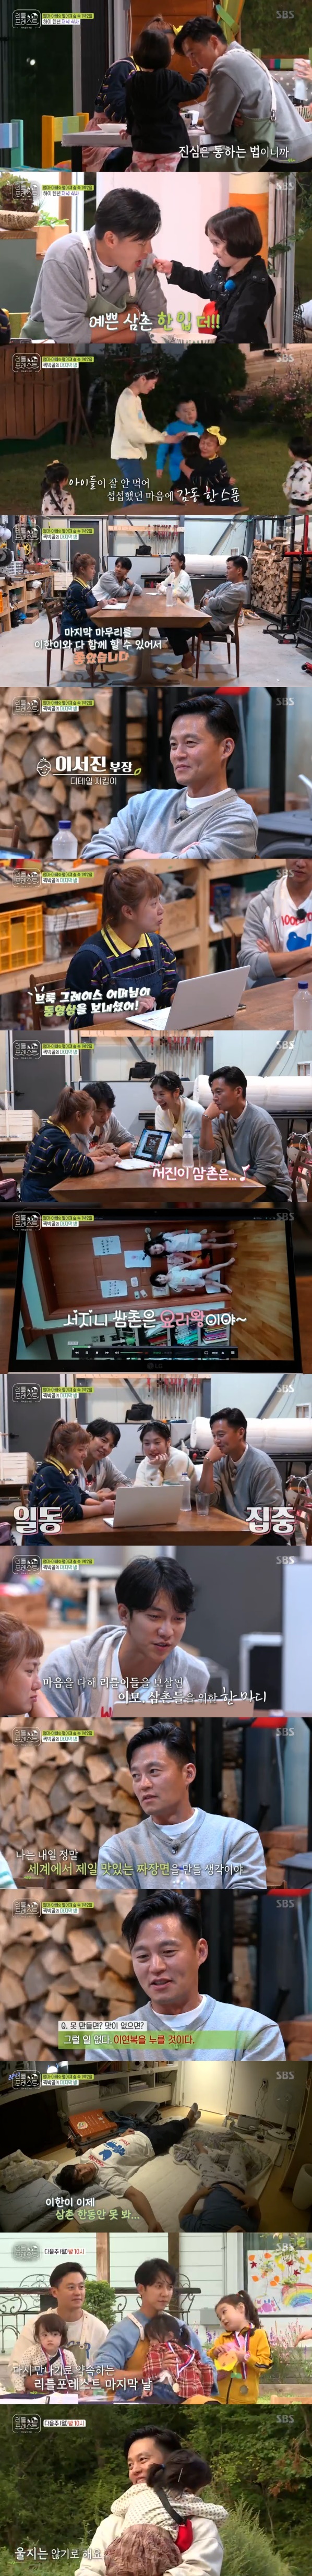 Seoul = = Little Forest Lee Seo-jin mentioned Chef Lee Yeon-bokIn the SBS entertainment program Little Forest broadcasted on the afternoon of the afternoon, the main Chef Lee Seo-jin declared that he would cook the jjajangmyeon ahead of the last day.Especially, he talked about Lee Yeon-bok, a Chinese cook, and said, I will press him in a good way.Park Na-rae was surprised to hear that late night messengers were Brook, Graces mother sent a video. It was a video that appeared to have been filmed at home.I think we put our name in little star and opened it, Park Na-rae said.When the video was played, Brooke and Grace sang excitedly: Seojin is The Uncle is Iron Chef America. Eat and give me another meal. Eat and dessert.I am so happy, the lyrics made Lee Seo-jin happy.Lee Seo-jin was pleased with the Mr. Lee dedication, saying, Is that my song? So Park Na-rae, Lee Seung-gi, and Jung So-min are sad and laugh.They joked that Seojin is not the Uncle song, Honestly, my sister does everything, It is wrongly packed and It is unreasonable.Eugene thanked her mother and sent her a letter of apology.Lee Seung-gi said: I told Eugene today is the last forest Travel and I dont think I know what it means yet.Everyone was really hard. Lee Seo-jin, in the meantime, said, Lets see the video again.Park Na-rae made a proposal for the last day: Lets do missions and stamp at each spot in the jagged bone, recalling a play for children.However, Lee Seo-jin did not concentrate on the meeting and laughed, saying, I am Iron Chef America, so I only think about cooking.He watched the video of Littles again and said, I think I should make some dessert. He said, Tomorrow I will make the best savory noodle in the world.Im going to press Lee Yeon-bok, he declared (?) and caught the eye.At the end of the broadcast, Lee had a genuine conversation with Lee Seung-gi. Lee knew that tomorrow was the last.Lee Seung-gi said, Is it okay to see the Uncle for a while? Lee said, Its okay but its not okay.Confessions, even though the time we had together was fun, made me feel that the last day was approaching again.